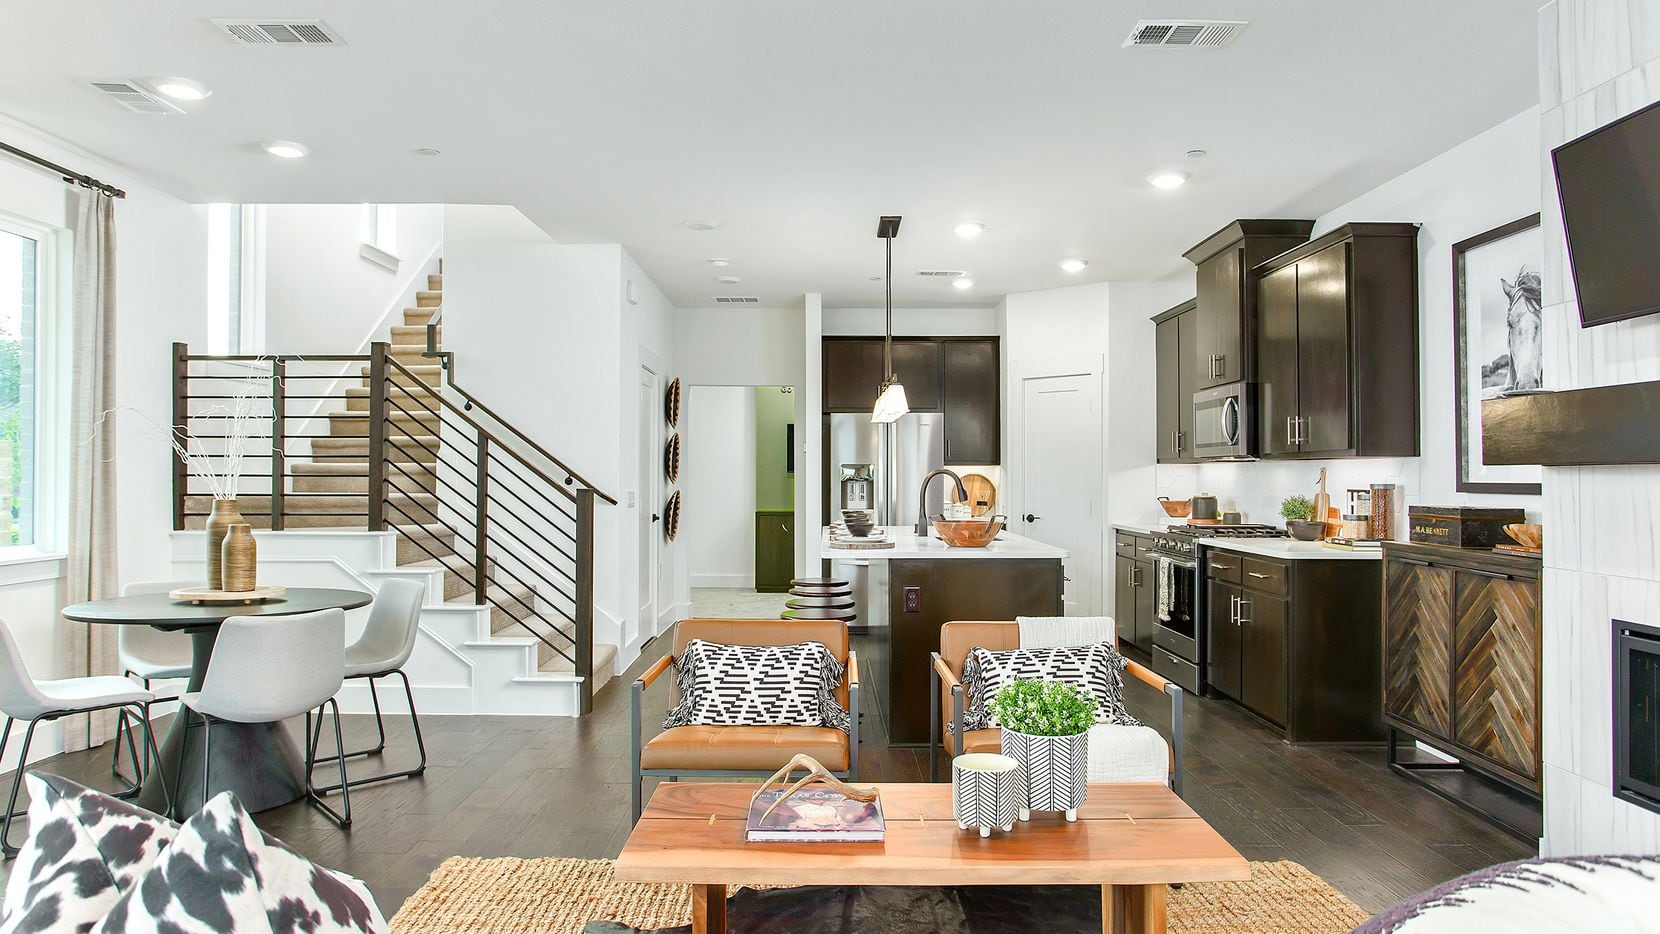 Low-maintenance townhomes by Grenadier Homes are ready to build from the mid-$200s in...